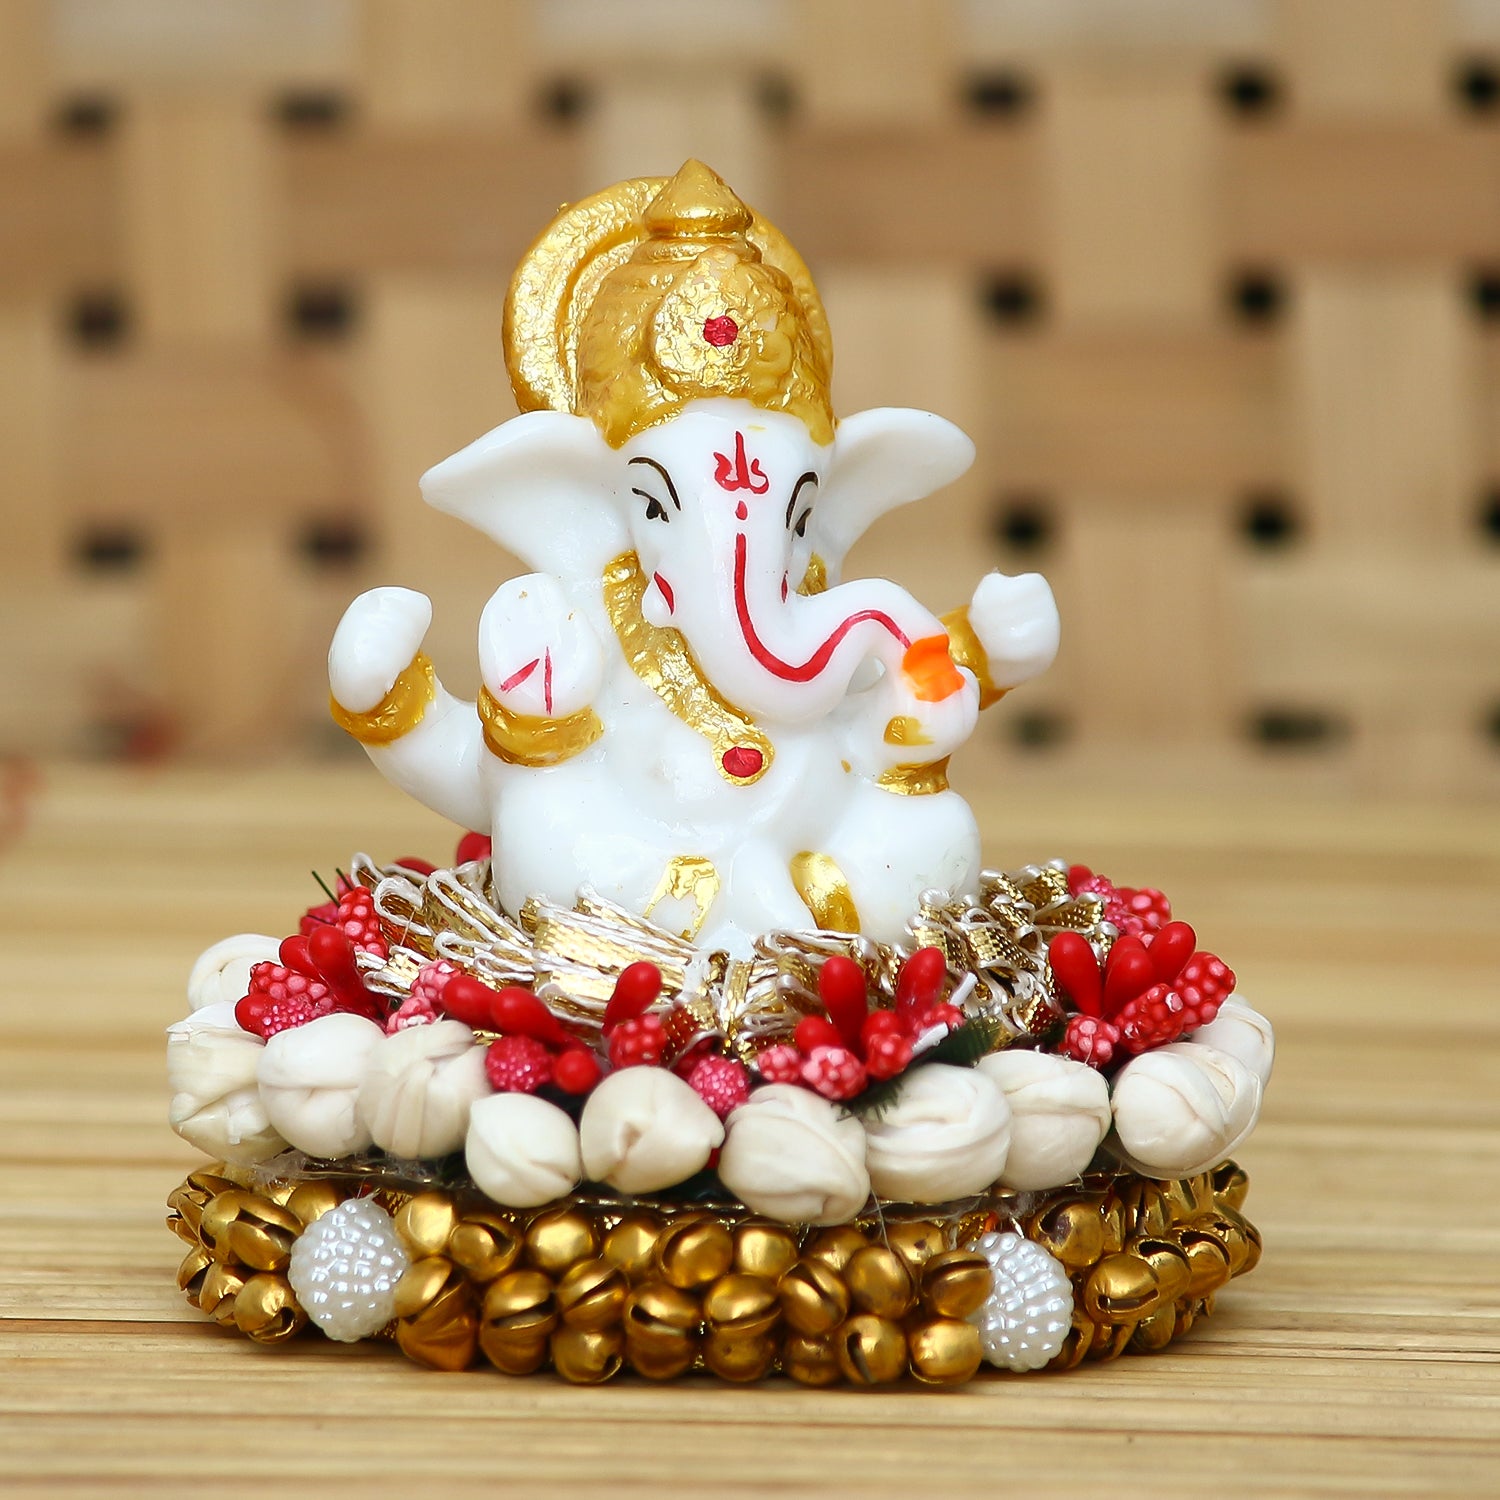 Polyresin Ganesha Idol on Decorative Handcrafted Plate for Home and Car Dashboard